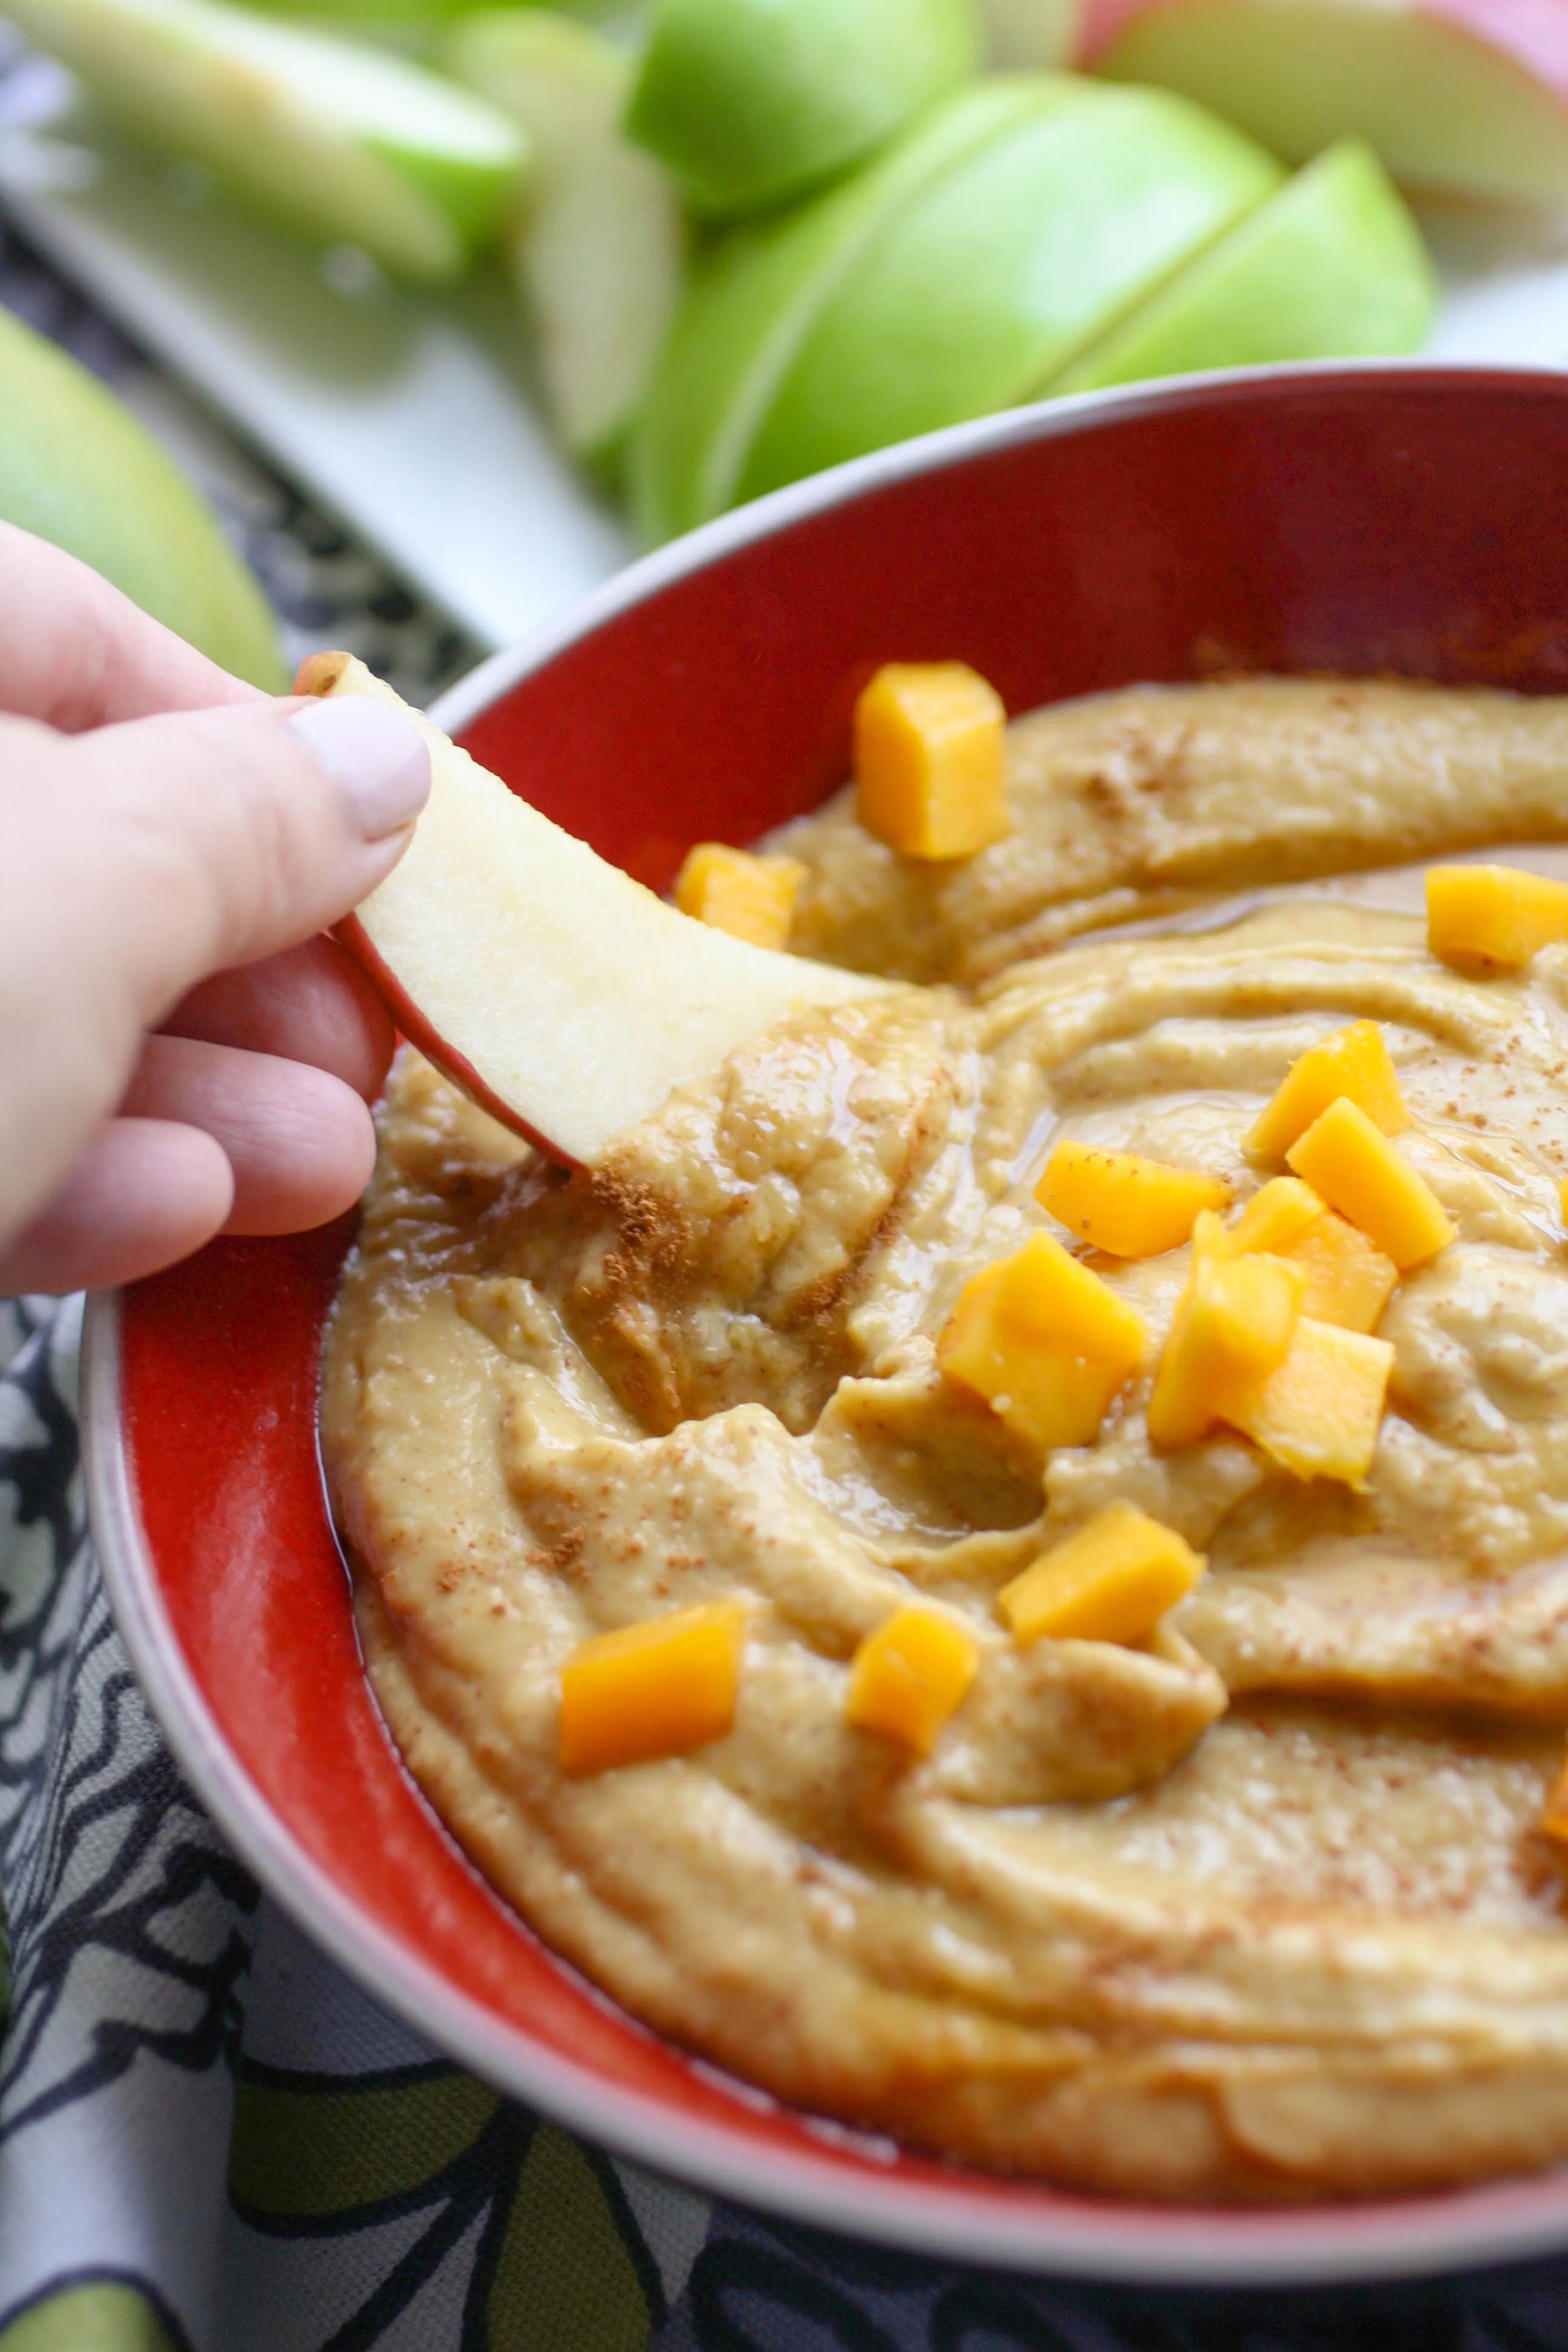 Honey-Mango Dessert Hummus is perfect as a snack or dessert. Toast up some pita chips sprinkled with a touch of sugar, and slice up some apples and you're set!